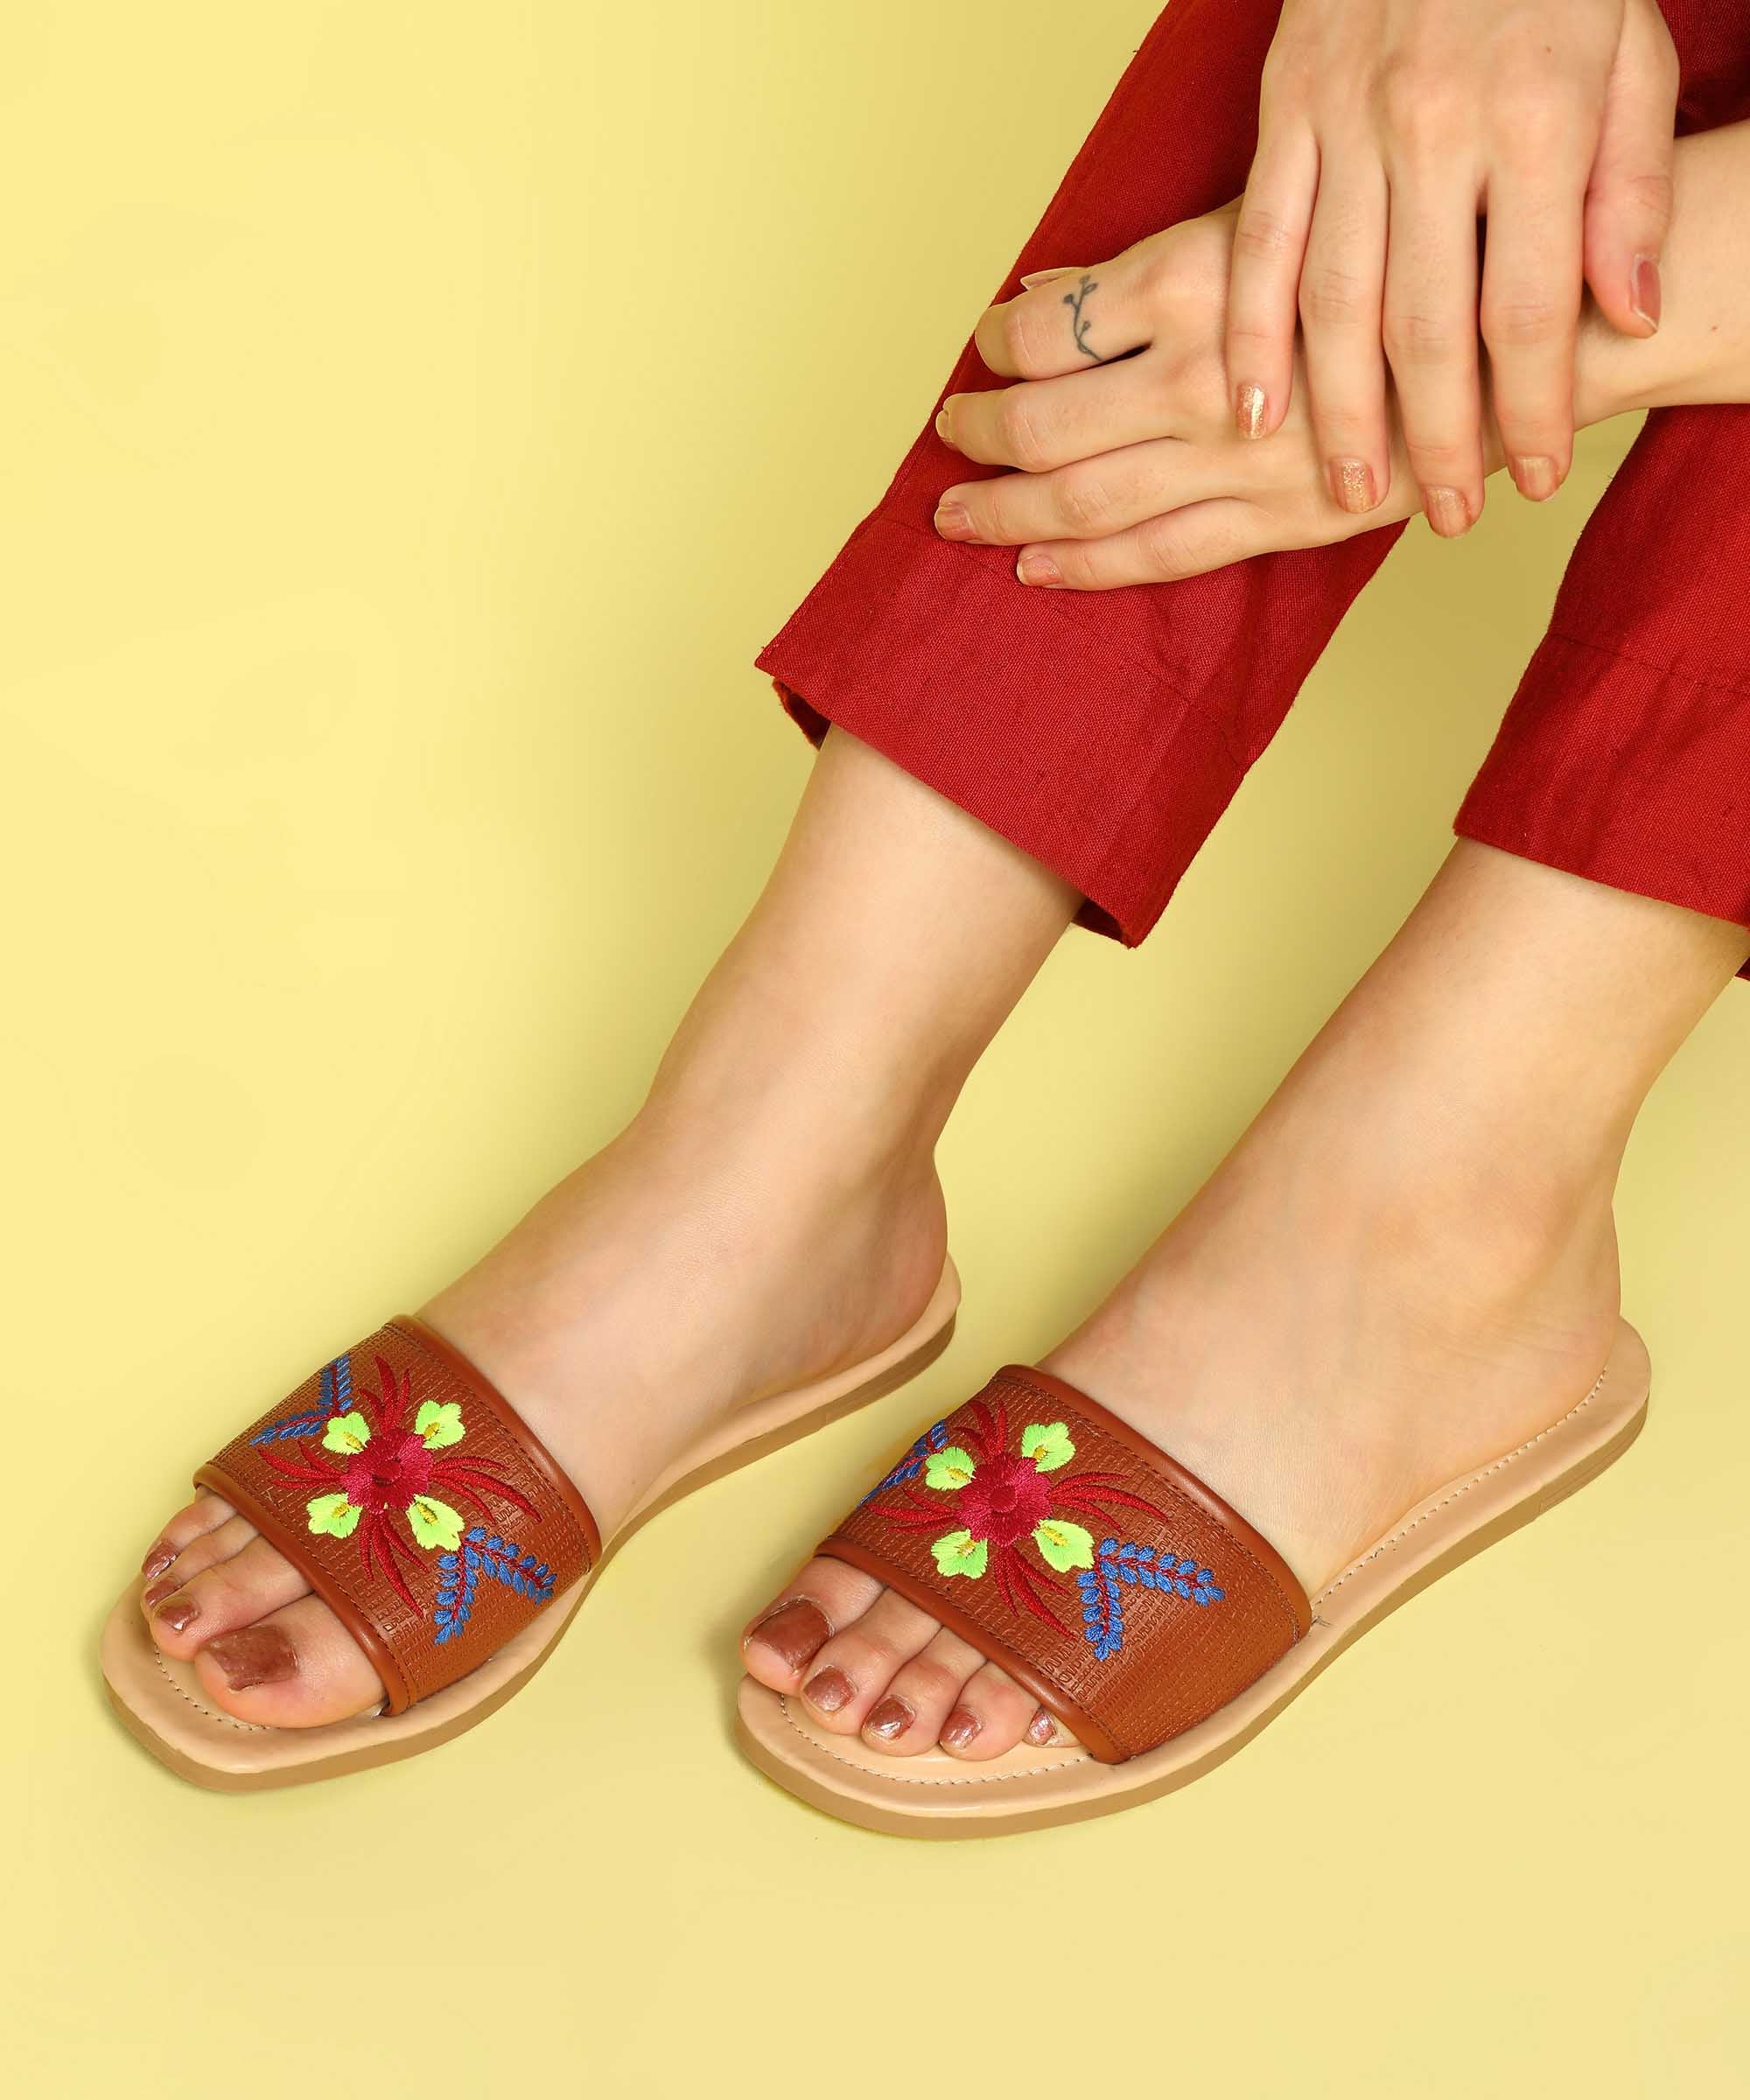 Paragon K6020L Women Sandals | Casual &amp; Formal Sandals | Stylish, Comfortable &amp; Durable | For Daily &amp; Occasion Wear